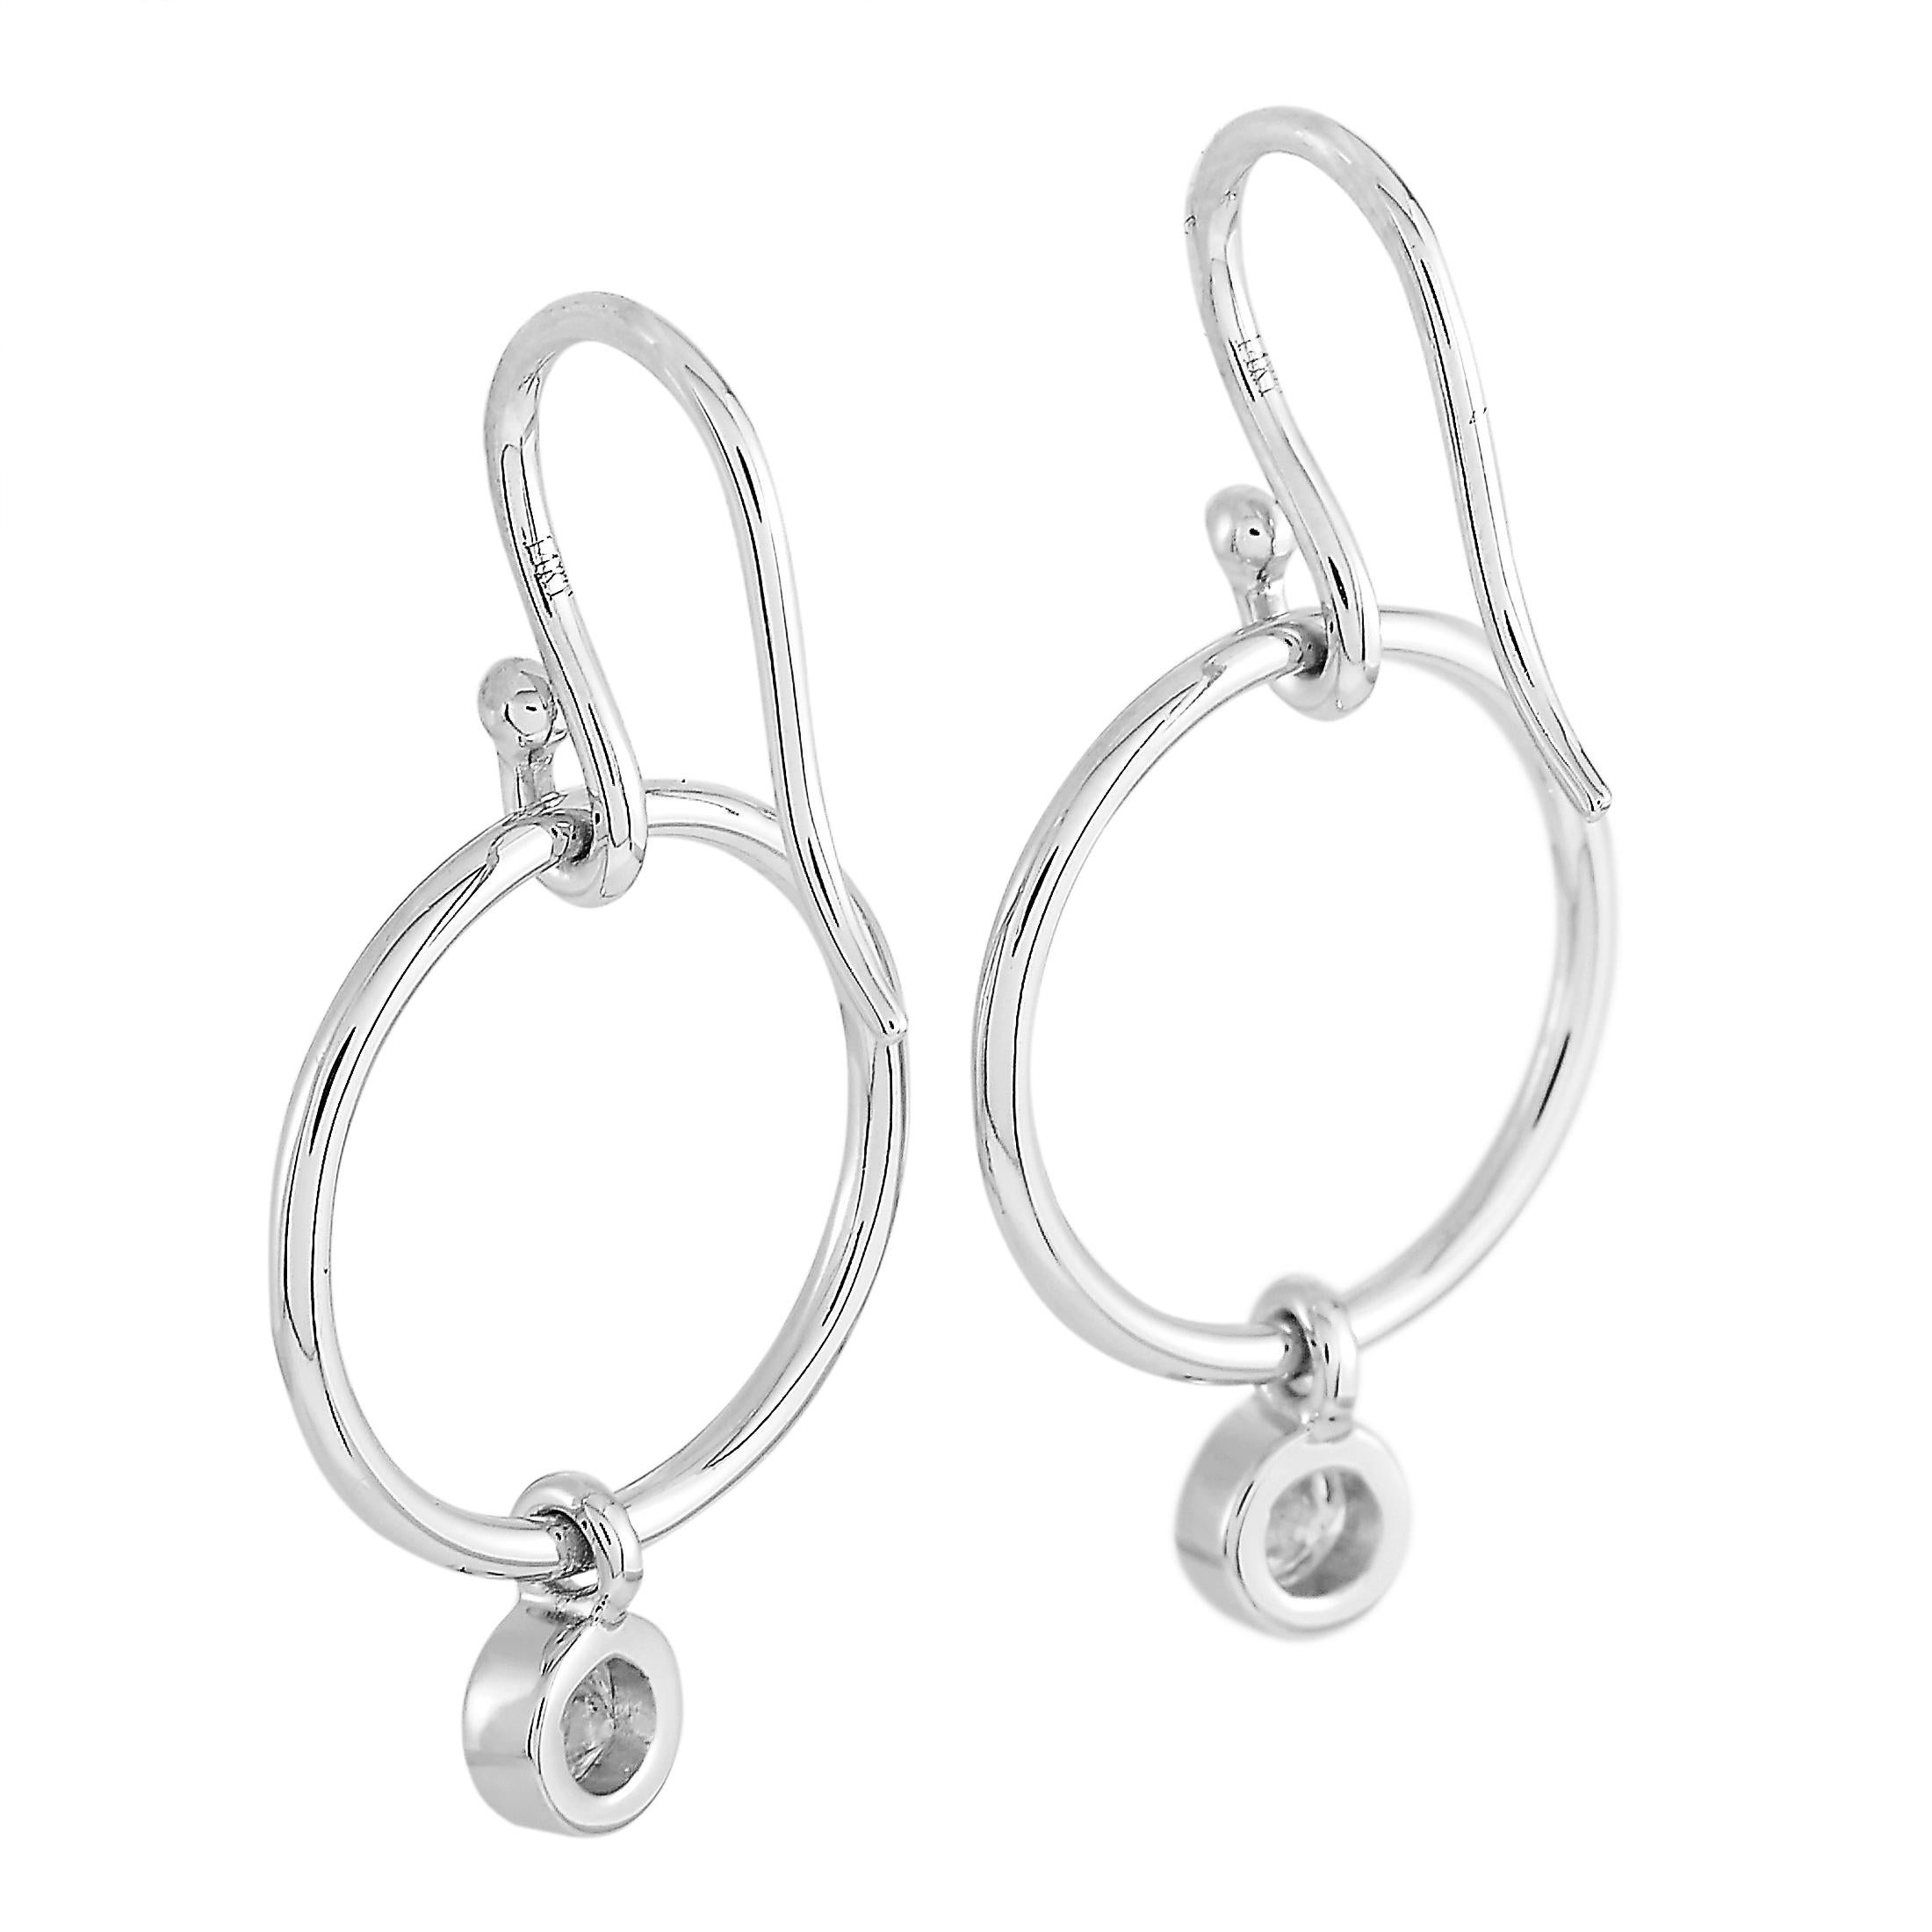 These LB Exclusive earrings are made of 14K white gold and embellished with diamonds that total 0.32 carats. The earrings measure 1.25” in length and 0.65” in width and each of the two weighs 1.4 grams.
 
 The pair is offered in brand new condition